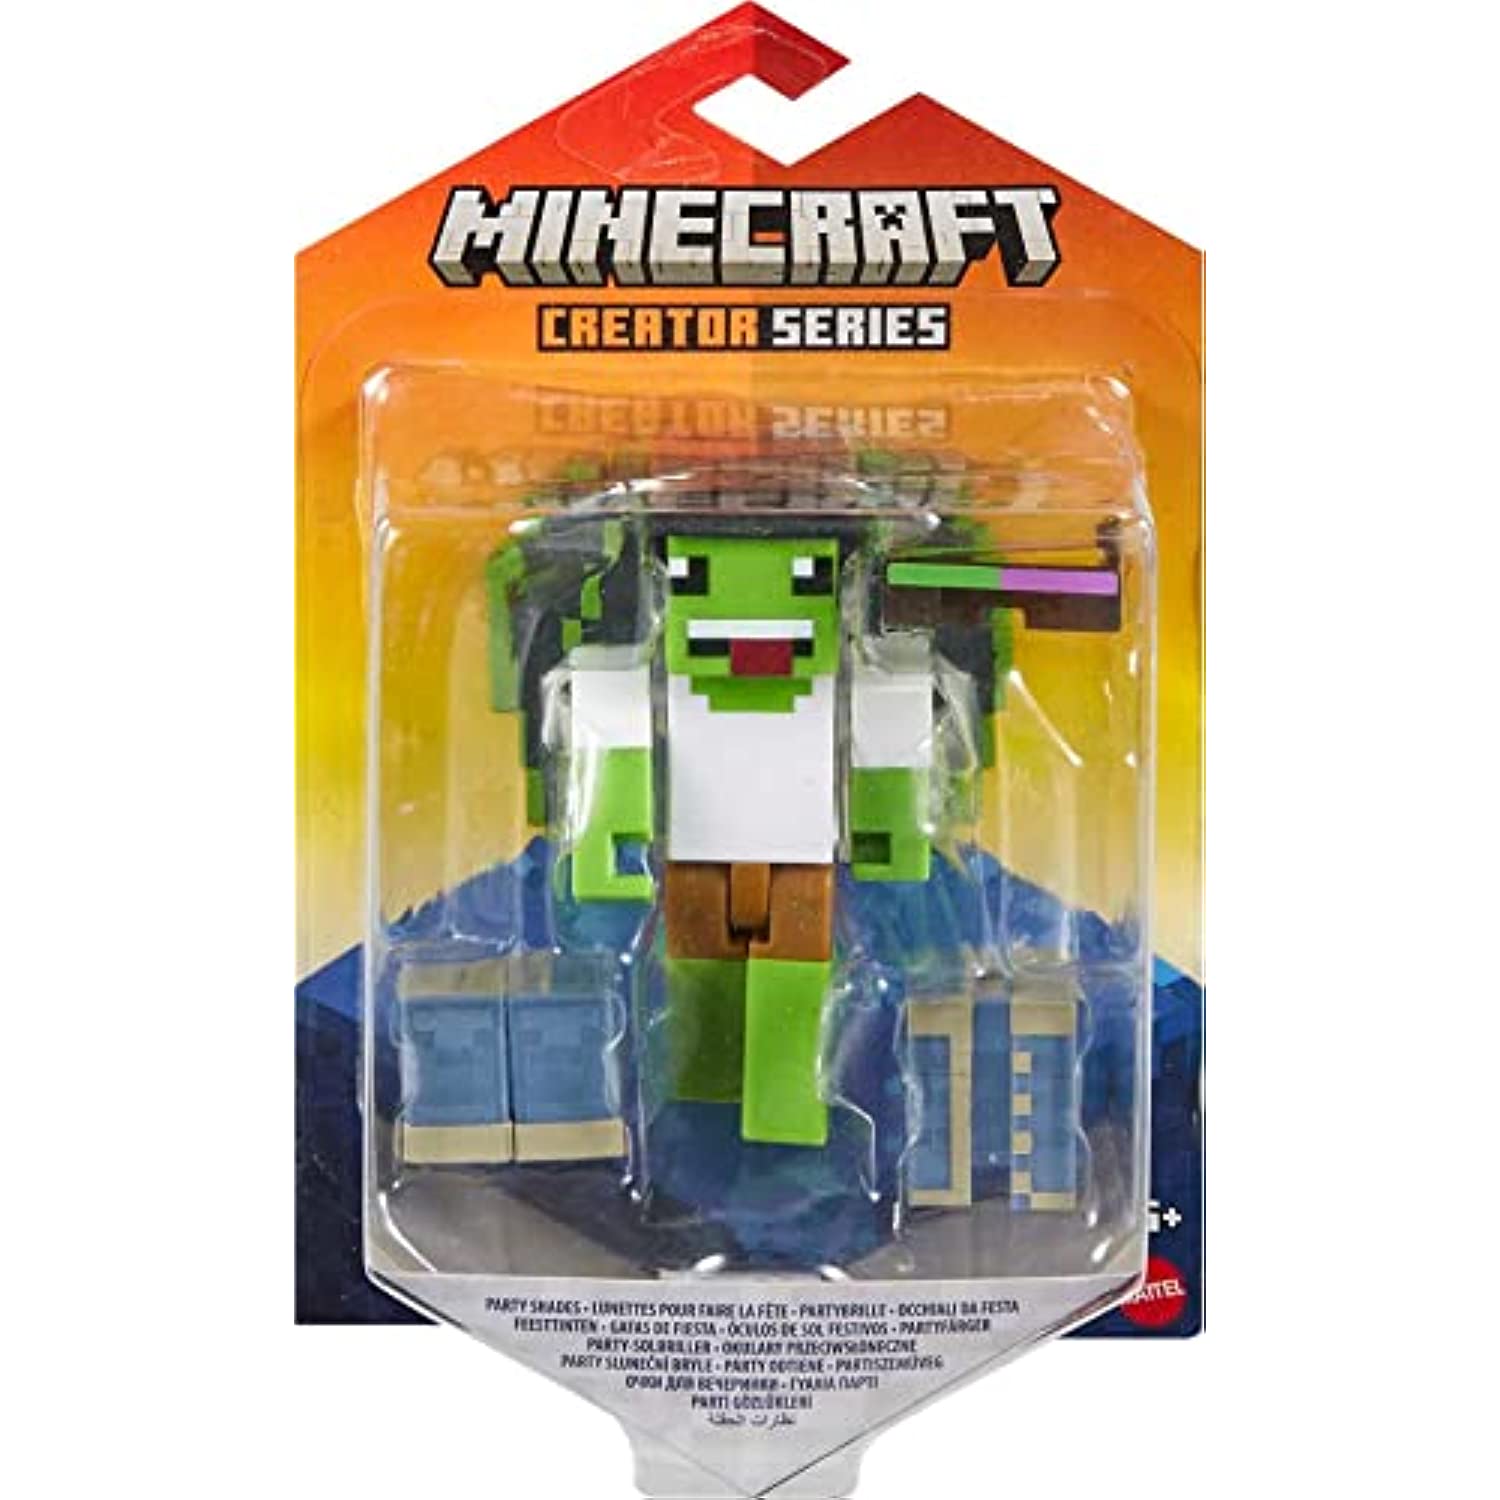 Minecraft Creator Series 3.25-in Action Figure (Party Shades) with Accessories